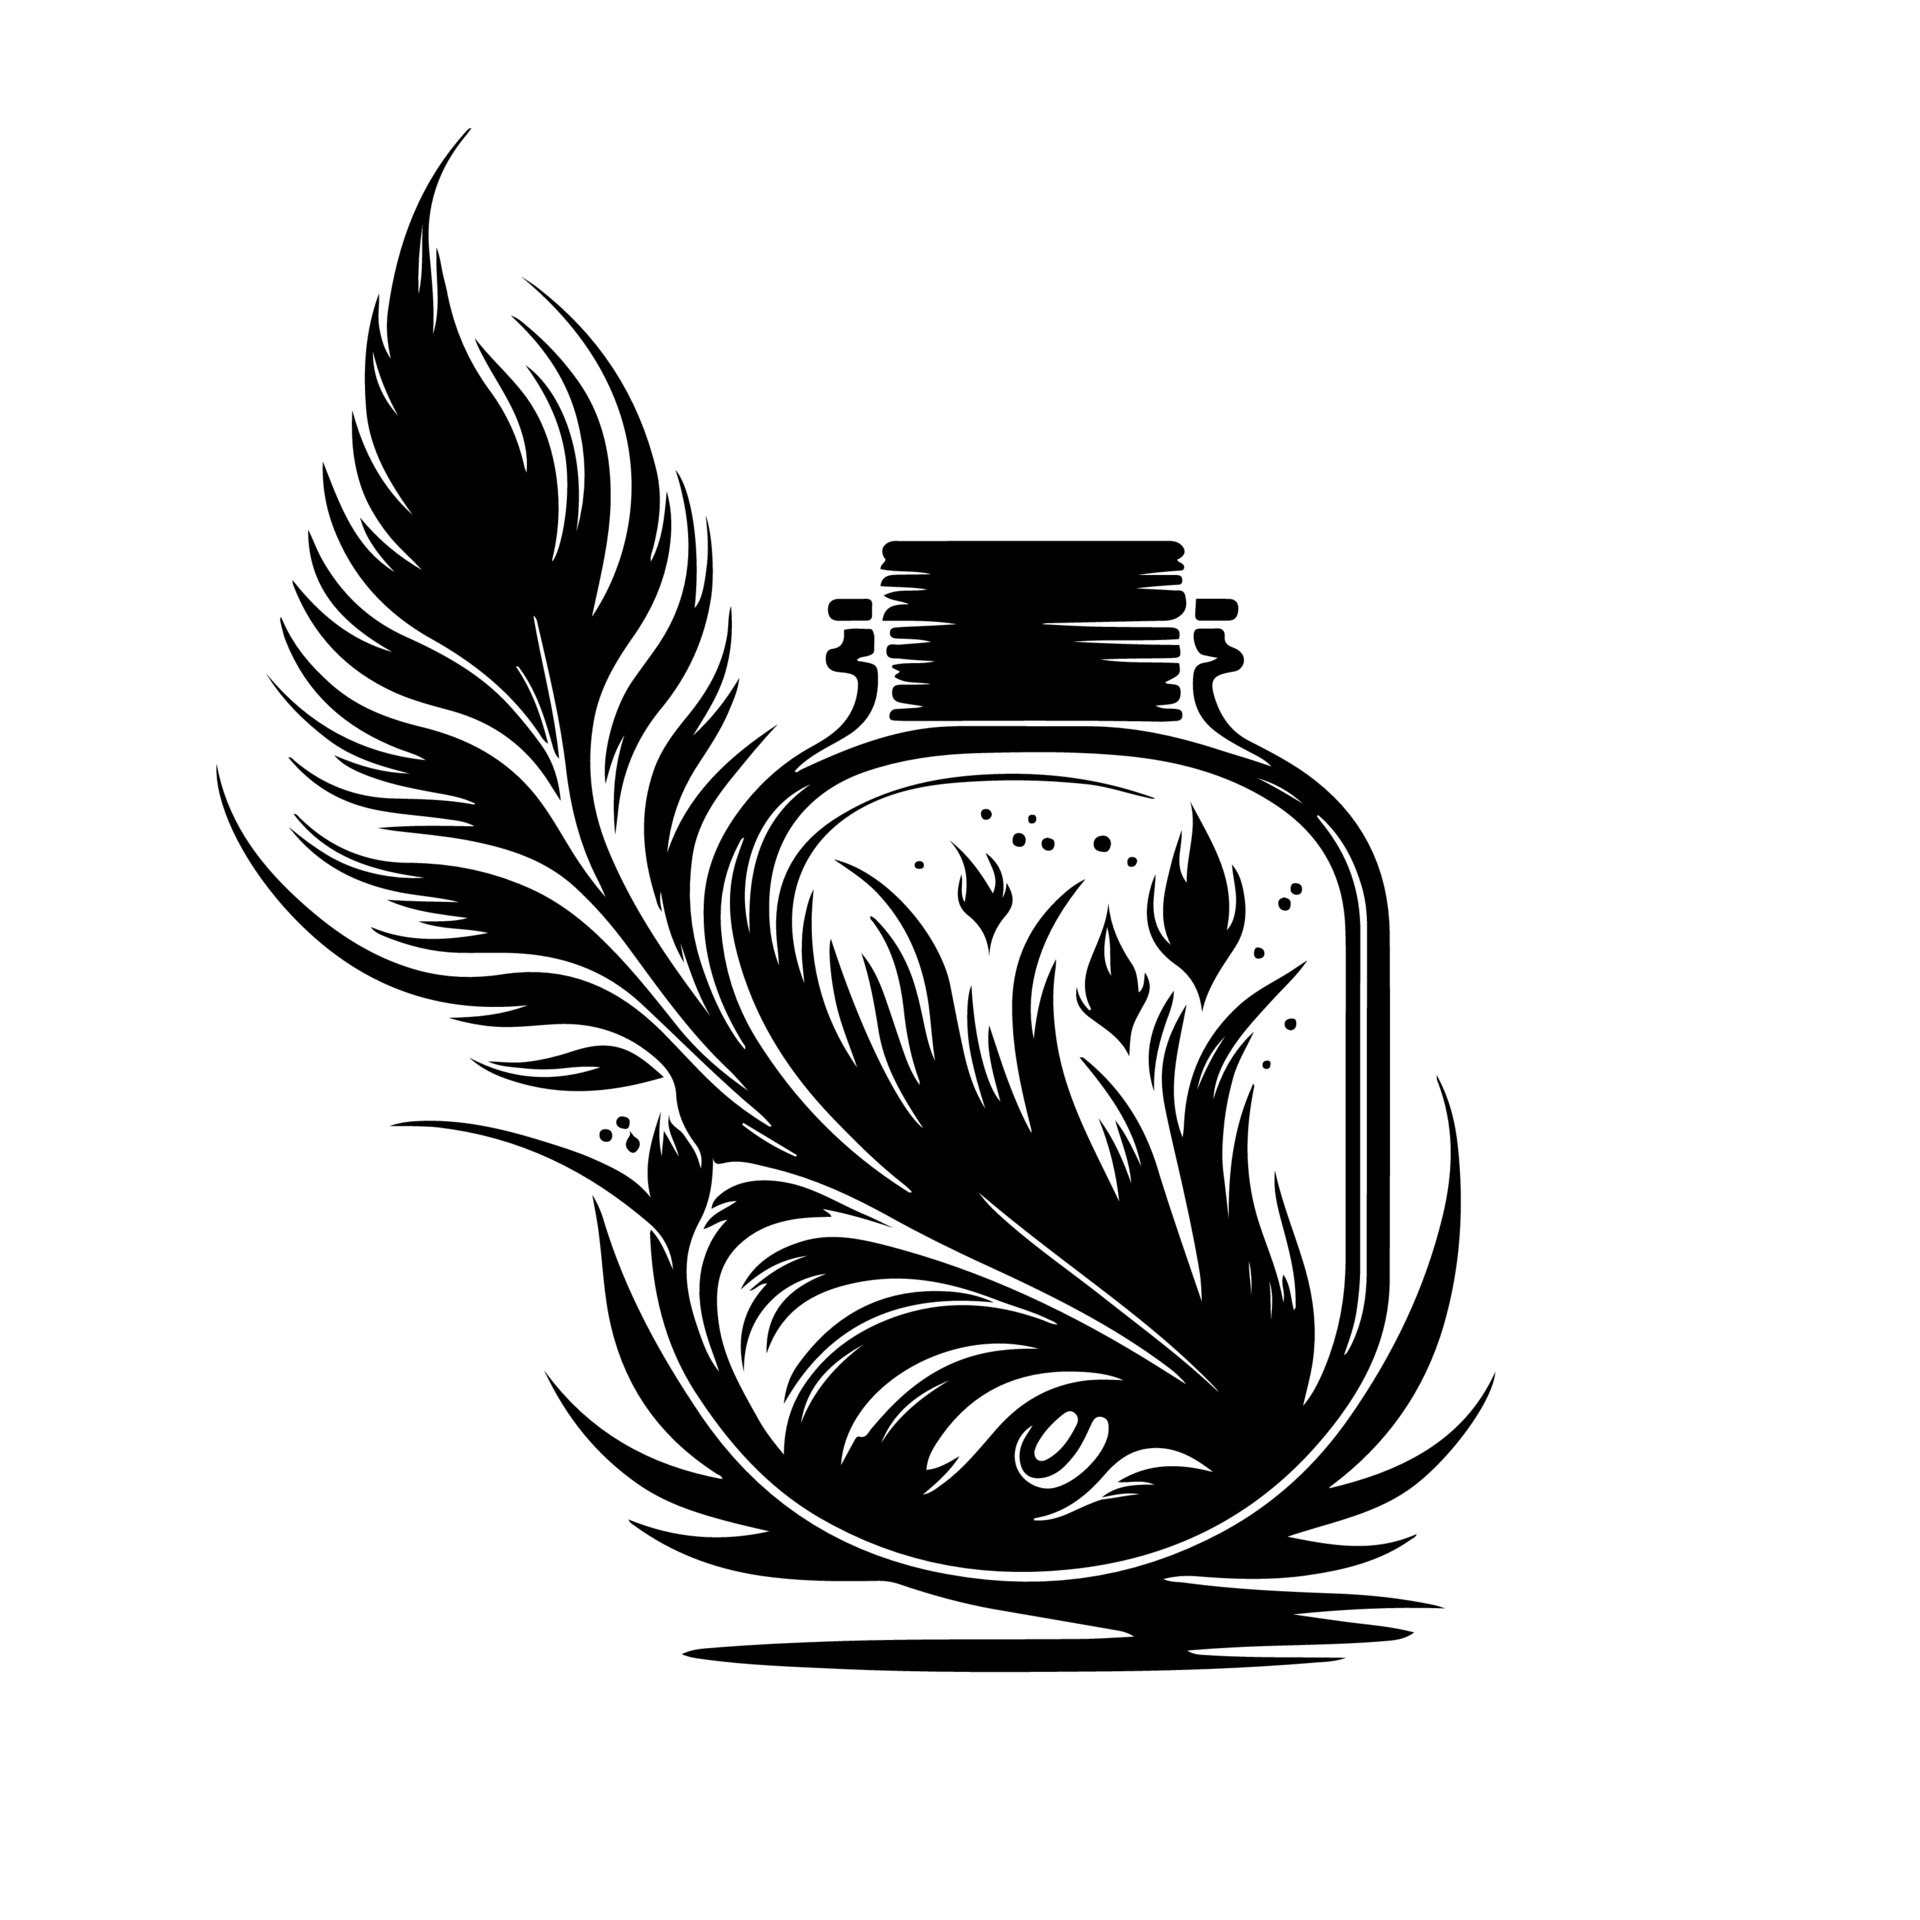 Ink drawing supplies with feather and ink bottle. Abstract vector illustration for artistic, calligraphy, and writing-related designs. 23052087 Vector Art at Vecteezy